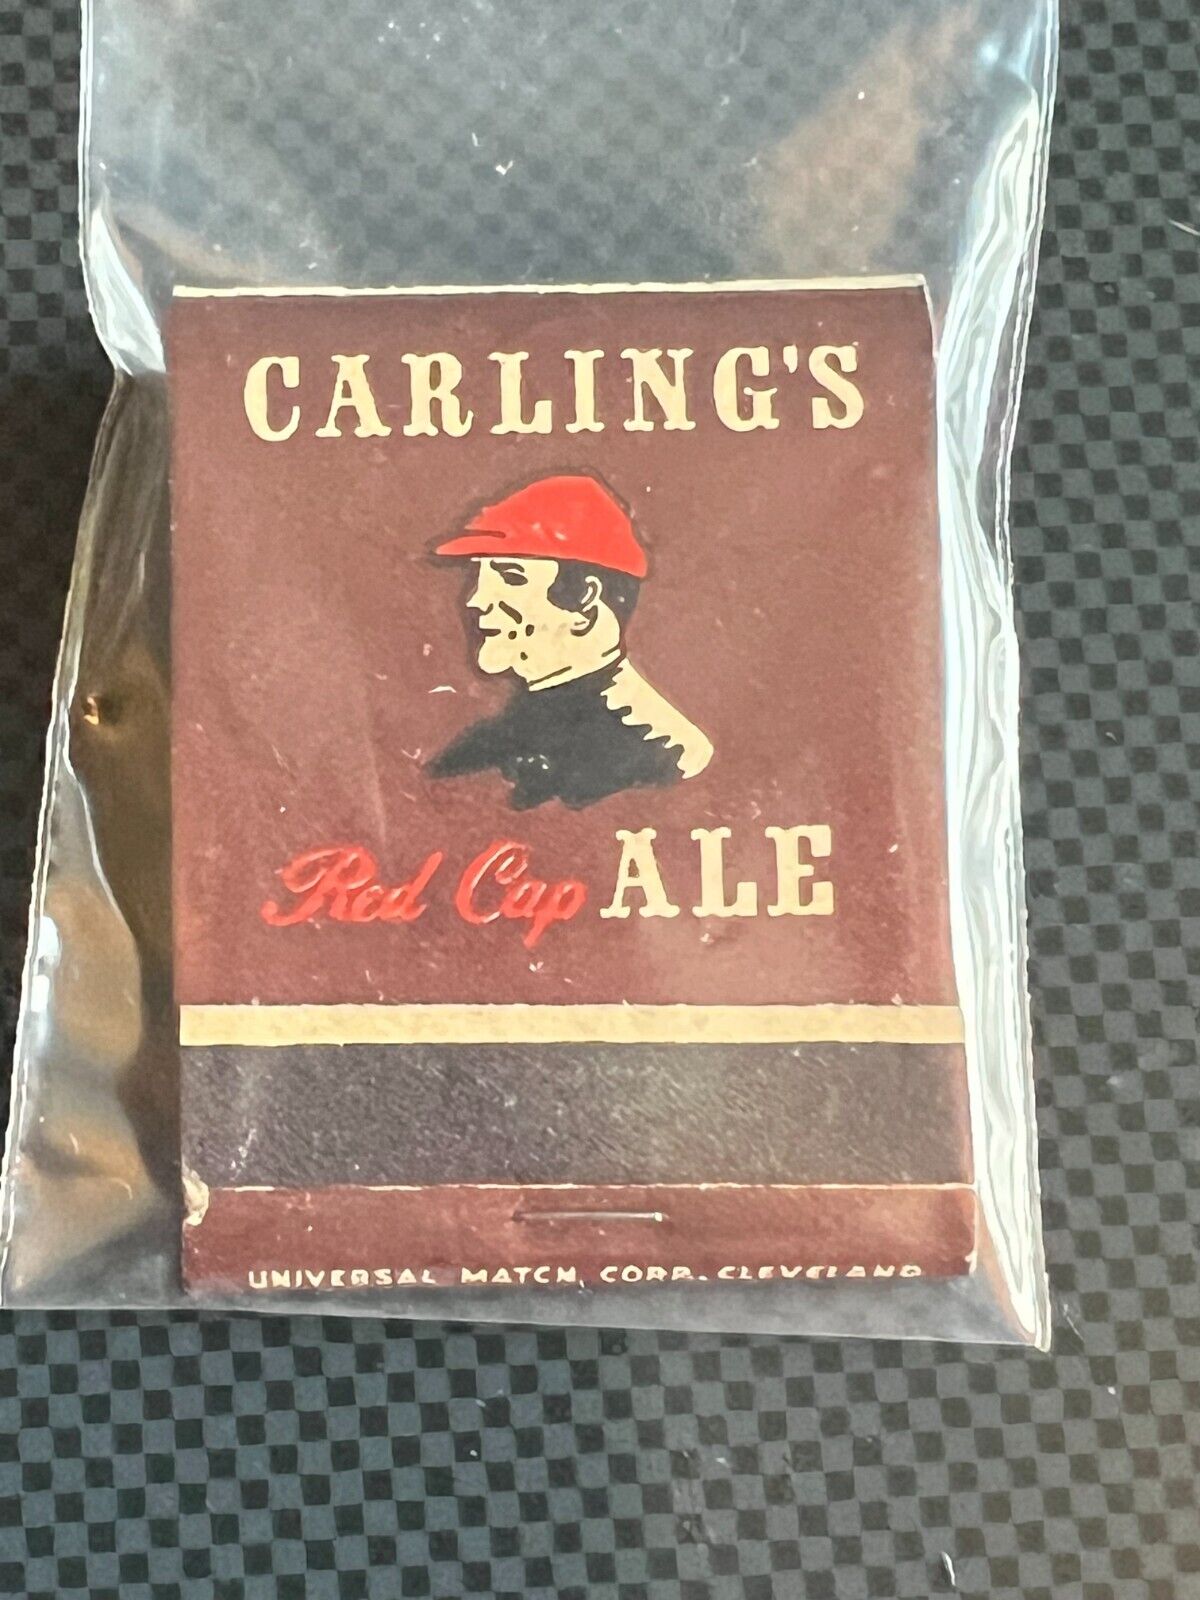 VINTAGE MATCHBOOK - CARLING\'S RED CAP ALE - BREWING CORP OF AMERICA  - UNSTRUCK